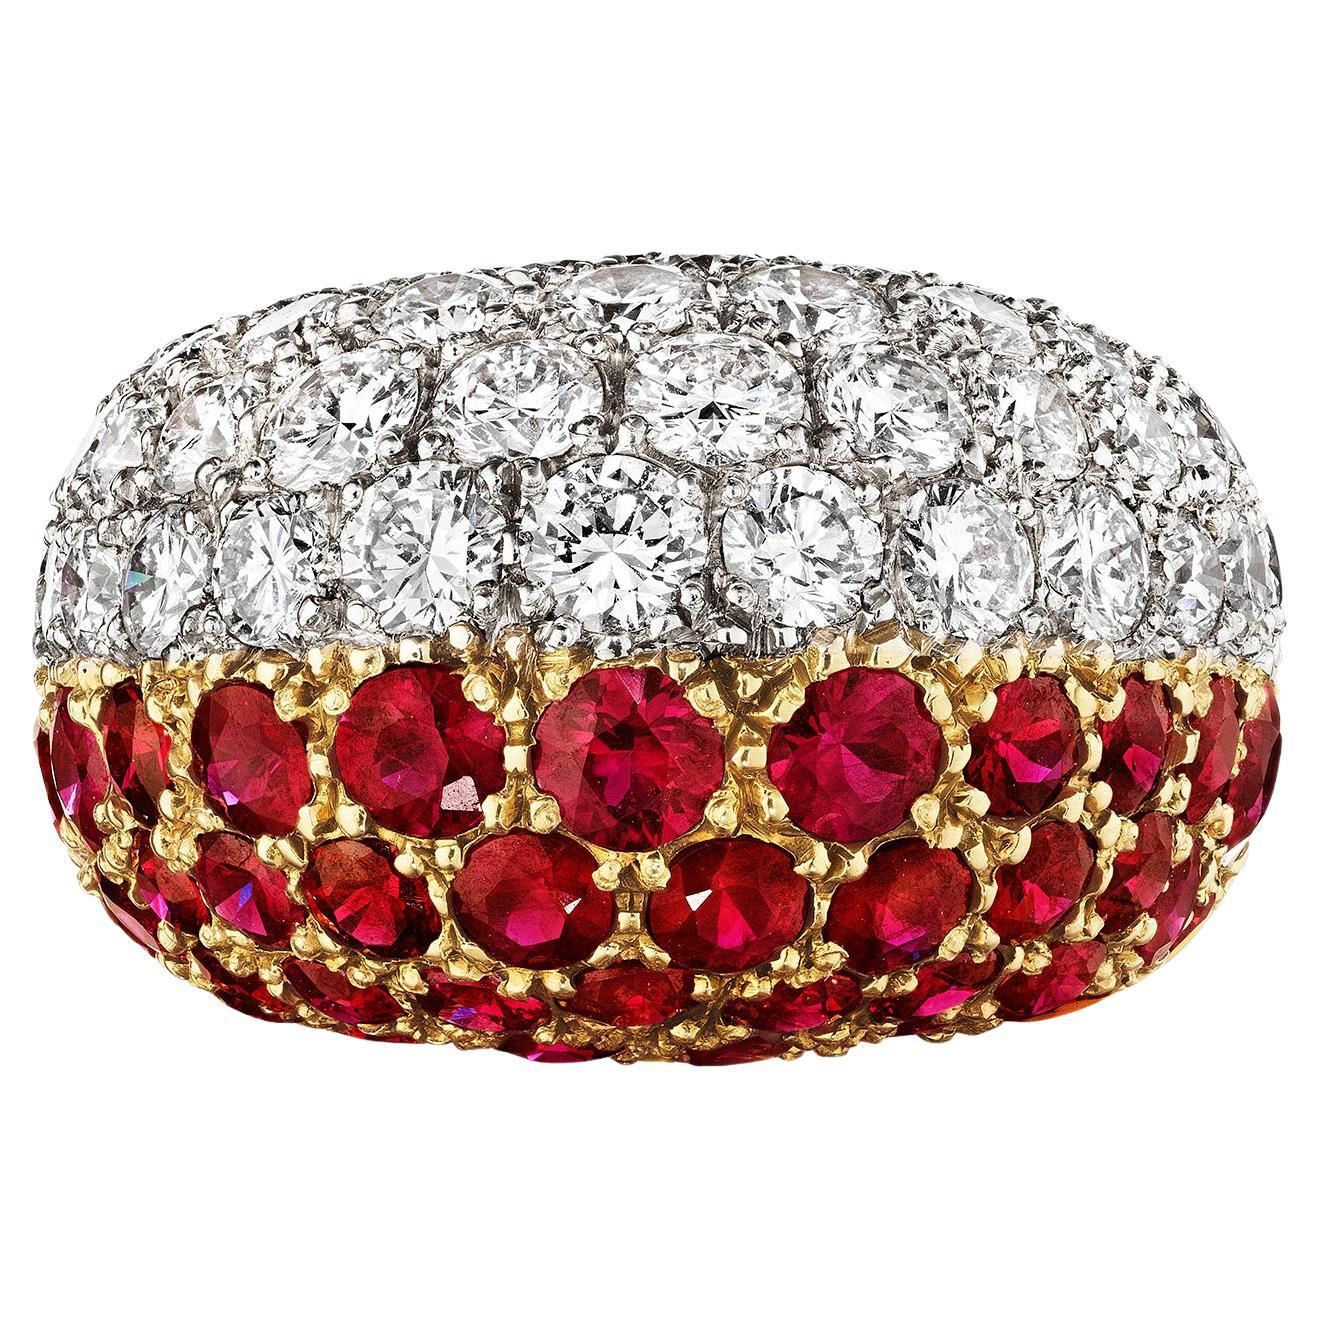 Bombé Ruby and Diamond Ring by Cartier, Paris, circa 1970
 
A ring of bombé form composed of pavé-set diamonds and rubies; mounted in platinum and yellow gold, with French assay marks
• Diamonds, total weighing approximately 4.5 carats 
• Rubies,